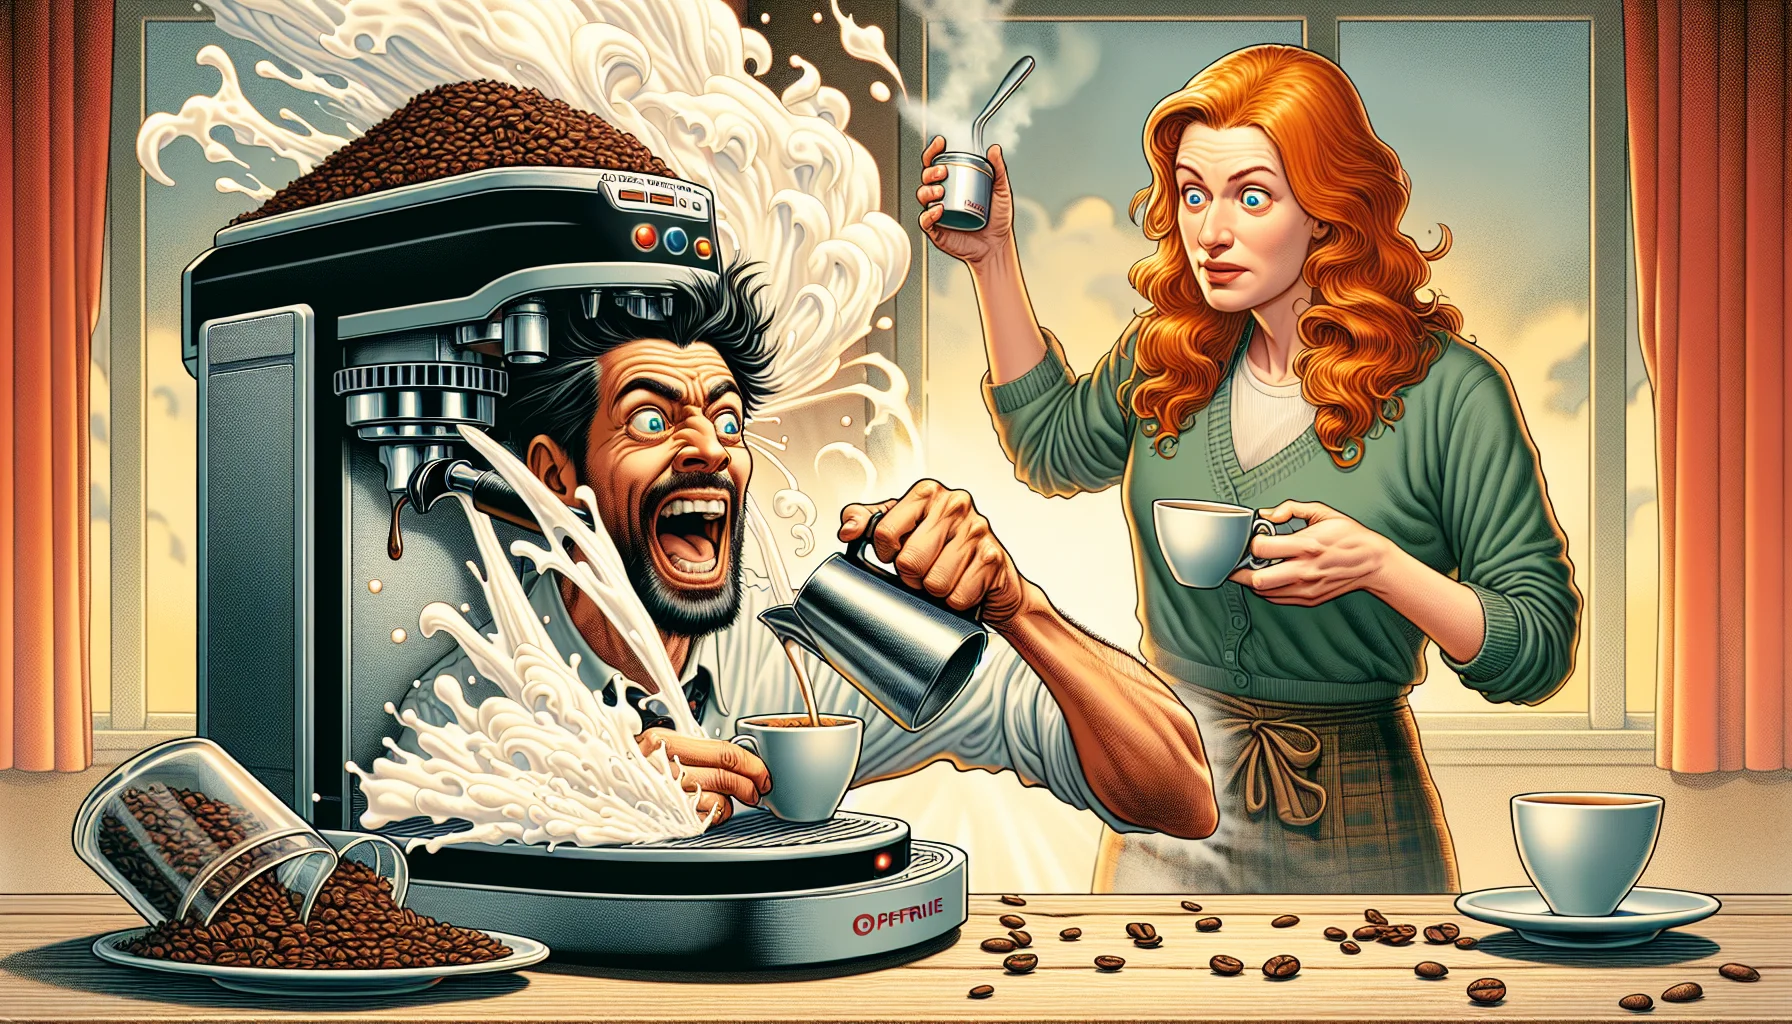 Generate a humorous and realistic illustration of a scene involving a non-branded espresso machine. Picture a man with black hair of Middle-Eastern descent struggling to control a frothy burst of milk as he's learning to use the espresso machine. A woman with ginger hair of Caucasian descent watches in amusement while holding an empty coffee cup, looking forward for her espresso. The background bursts with aromas of freshly ground coffee beans and steam, adding a layer of realism to the scene. This image seeks to evoke laughter, and at the same time, entice coffee lovers to enjoy making their espresso.